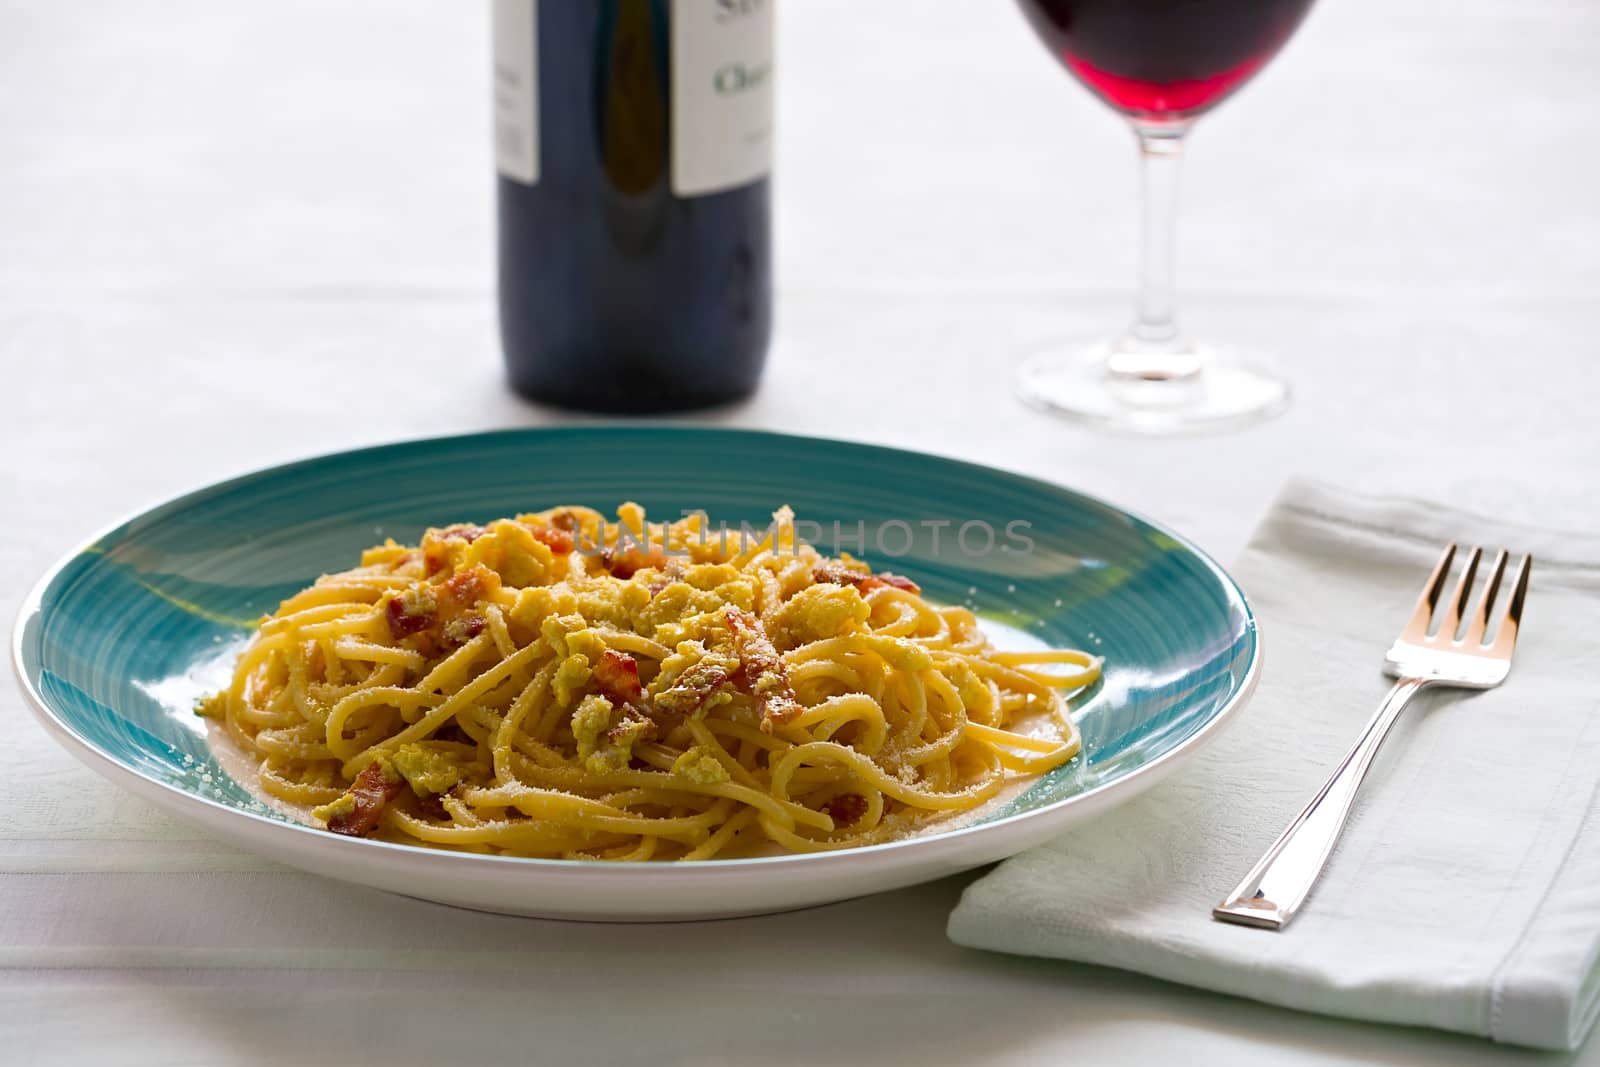 Spaghetti carbonara with egg, smoked bacon and cheese over a table with a wine glass